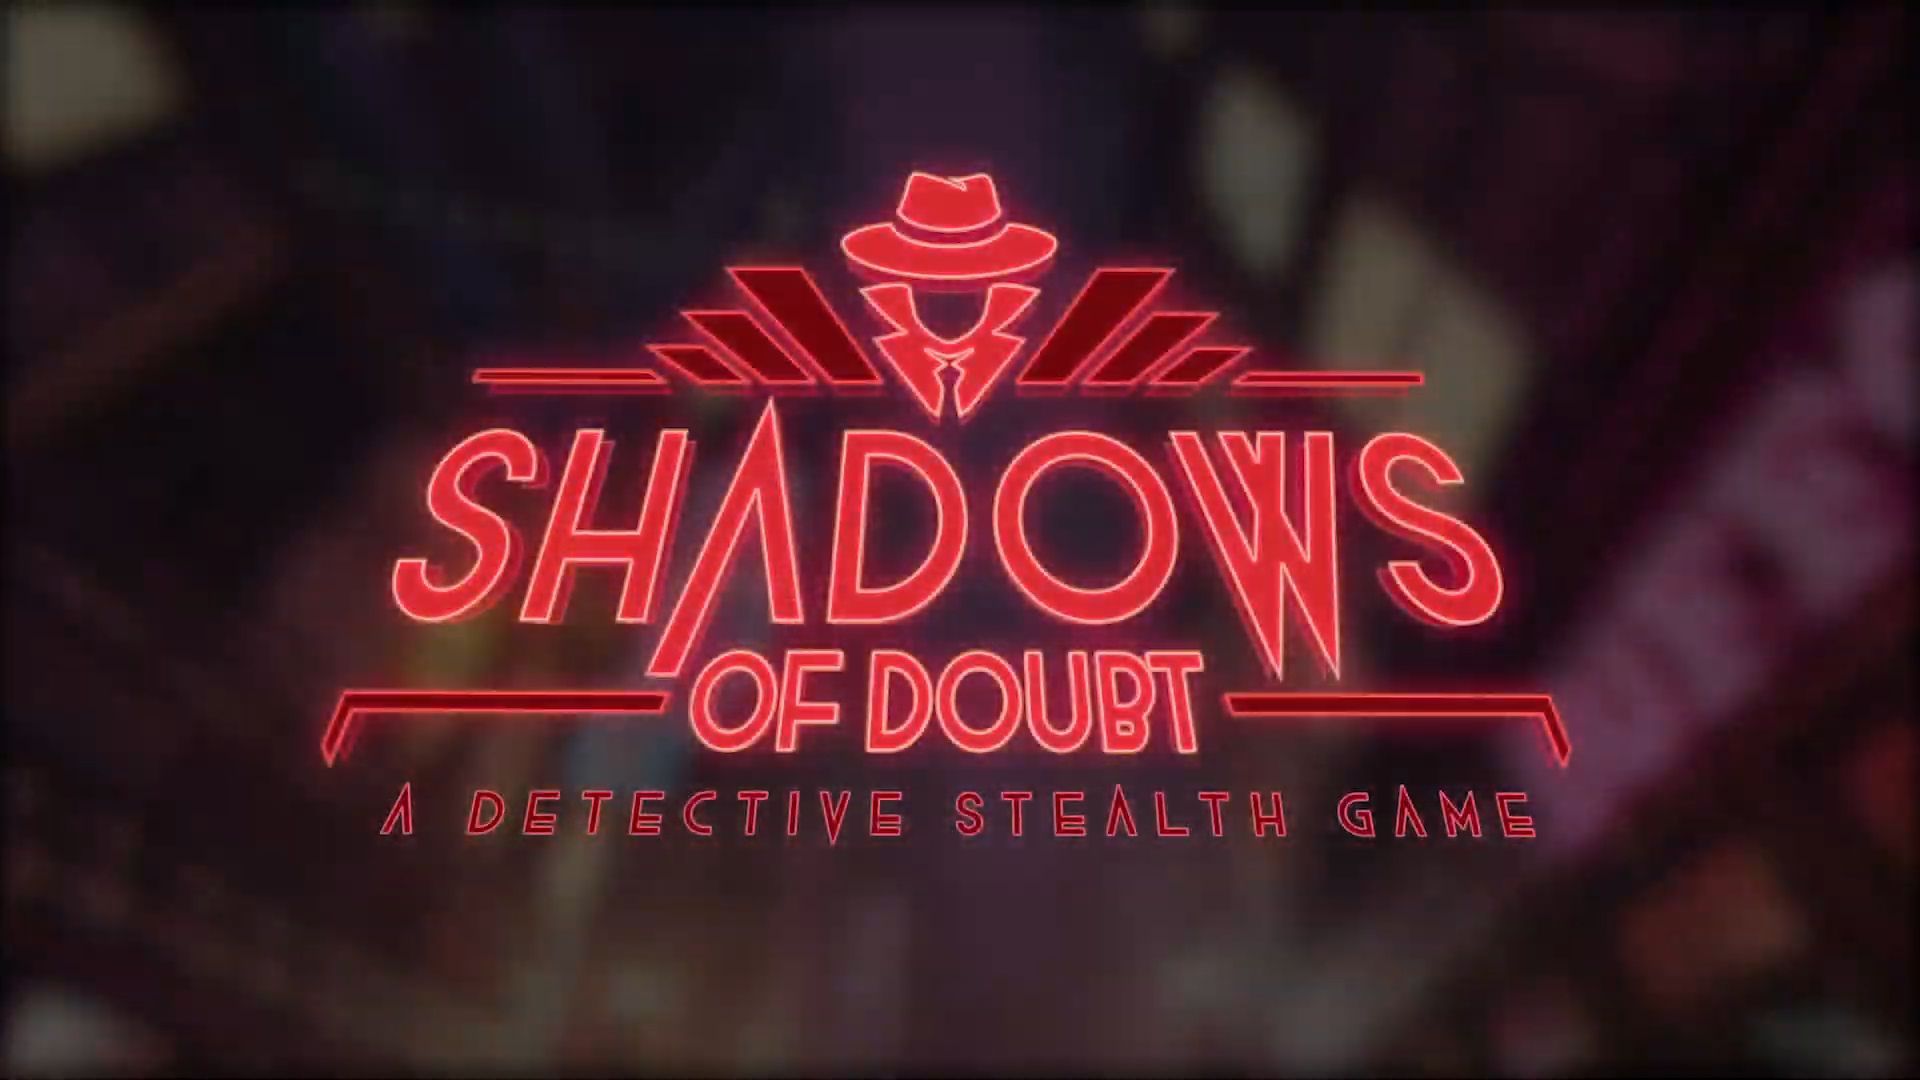 Shadows of Doubt: Here is no crime like the next (Gameplay Teaser)